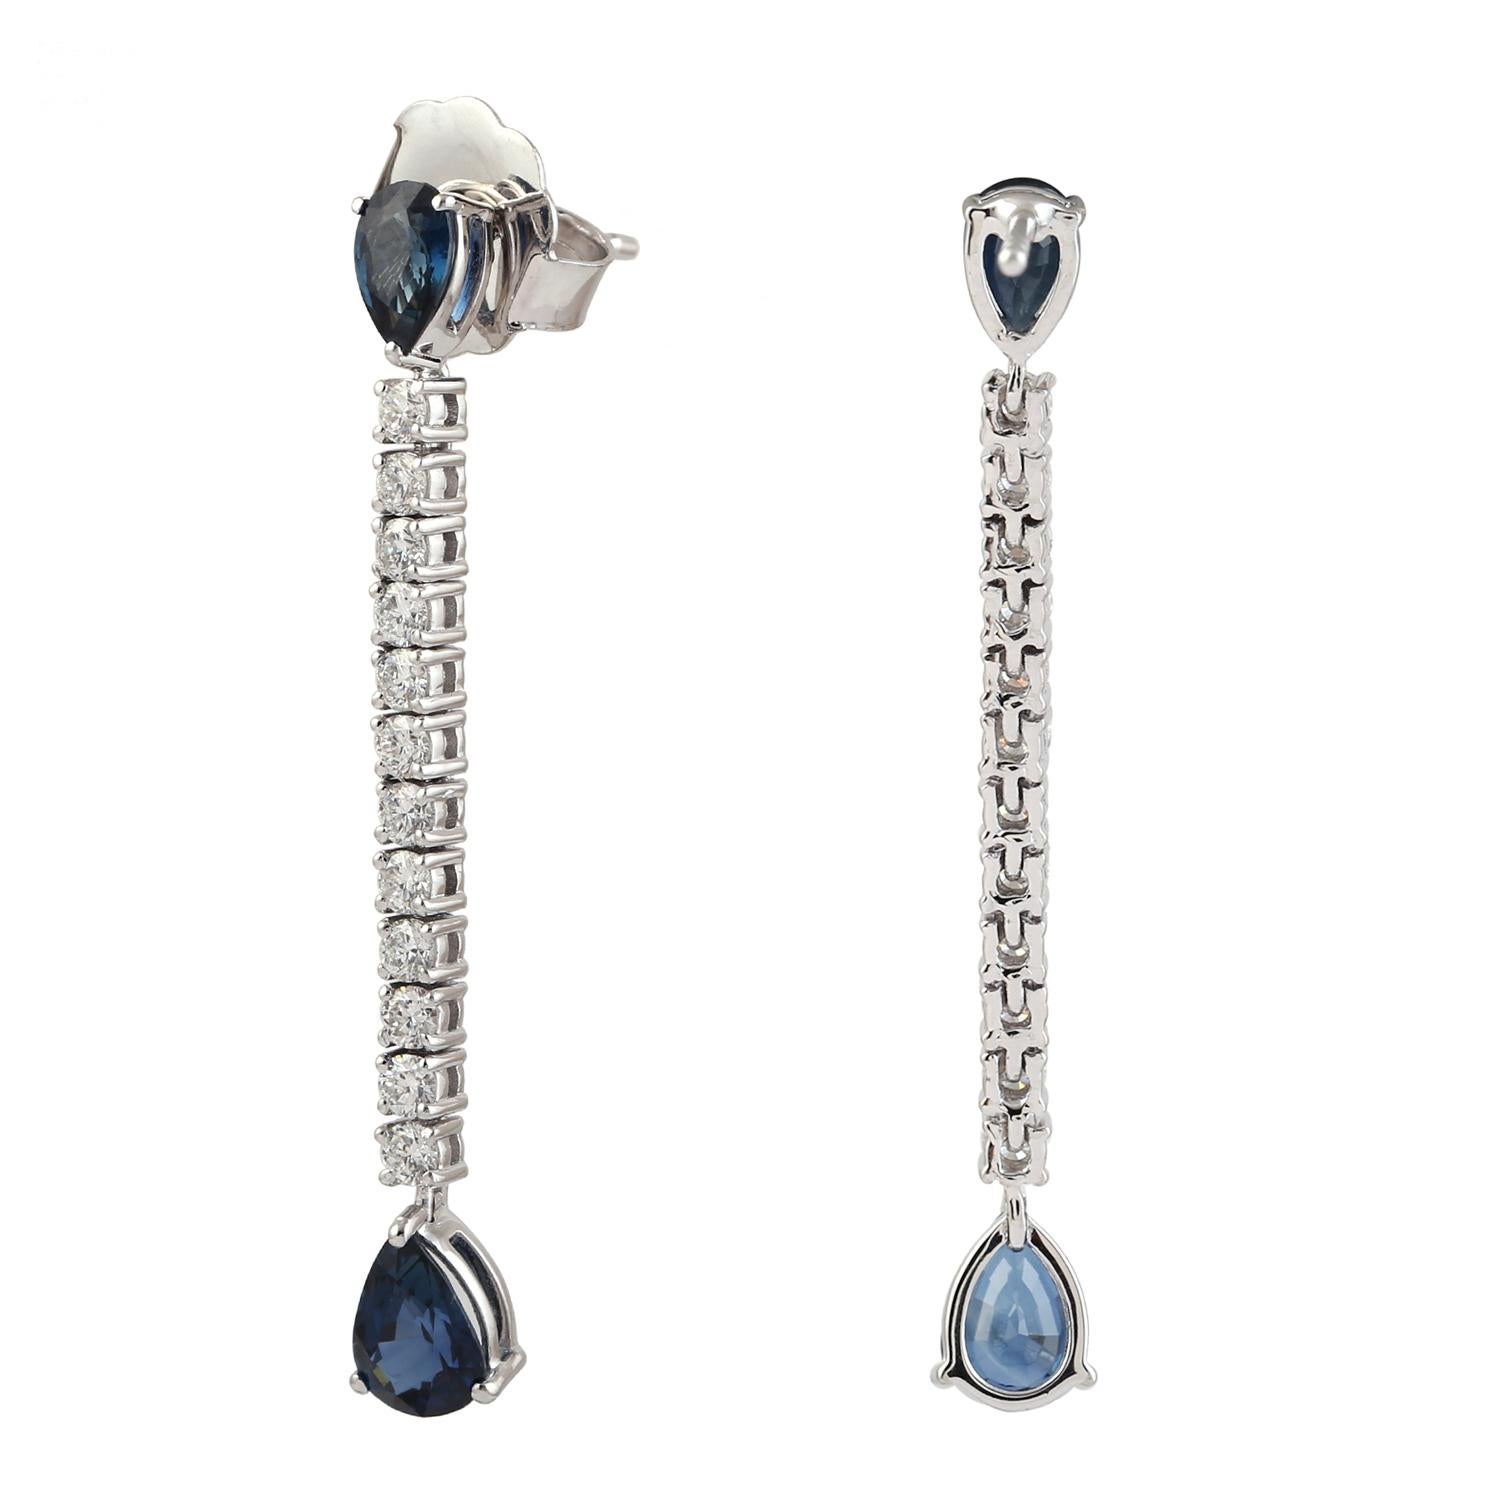 Contemporary Pear Shaped Blue Sapphire Chain Earrings With Diamonds Made In 18k Gold For Sale